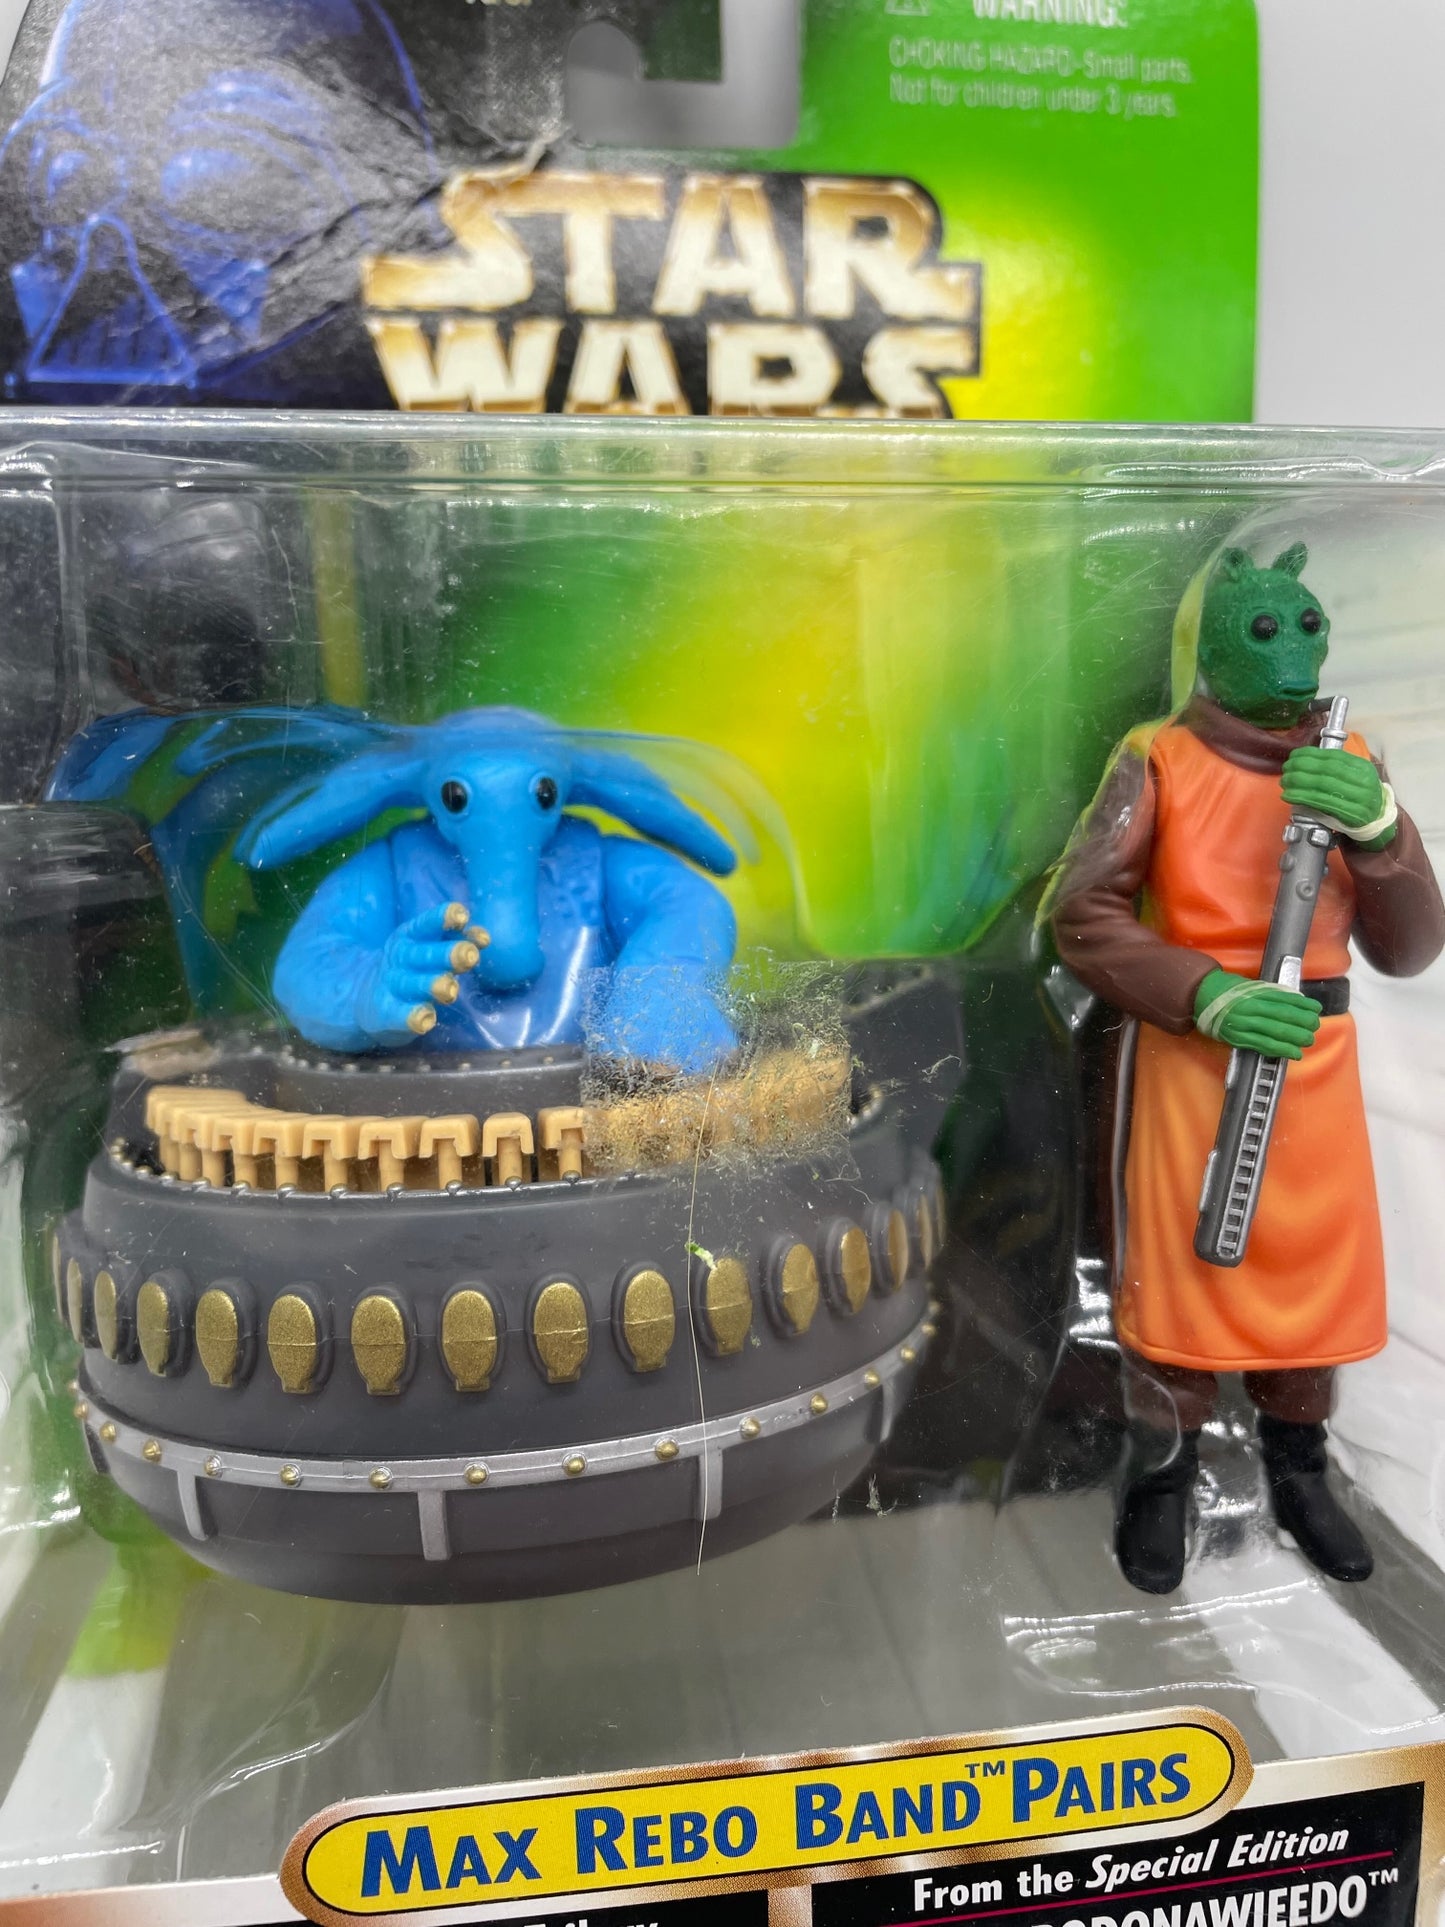 Power of the Force Max Rebo Band Pair Action Figure Set, Hasbro 1998